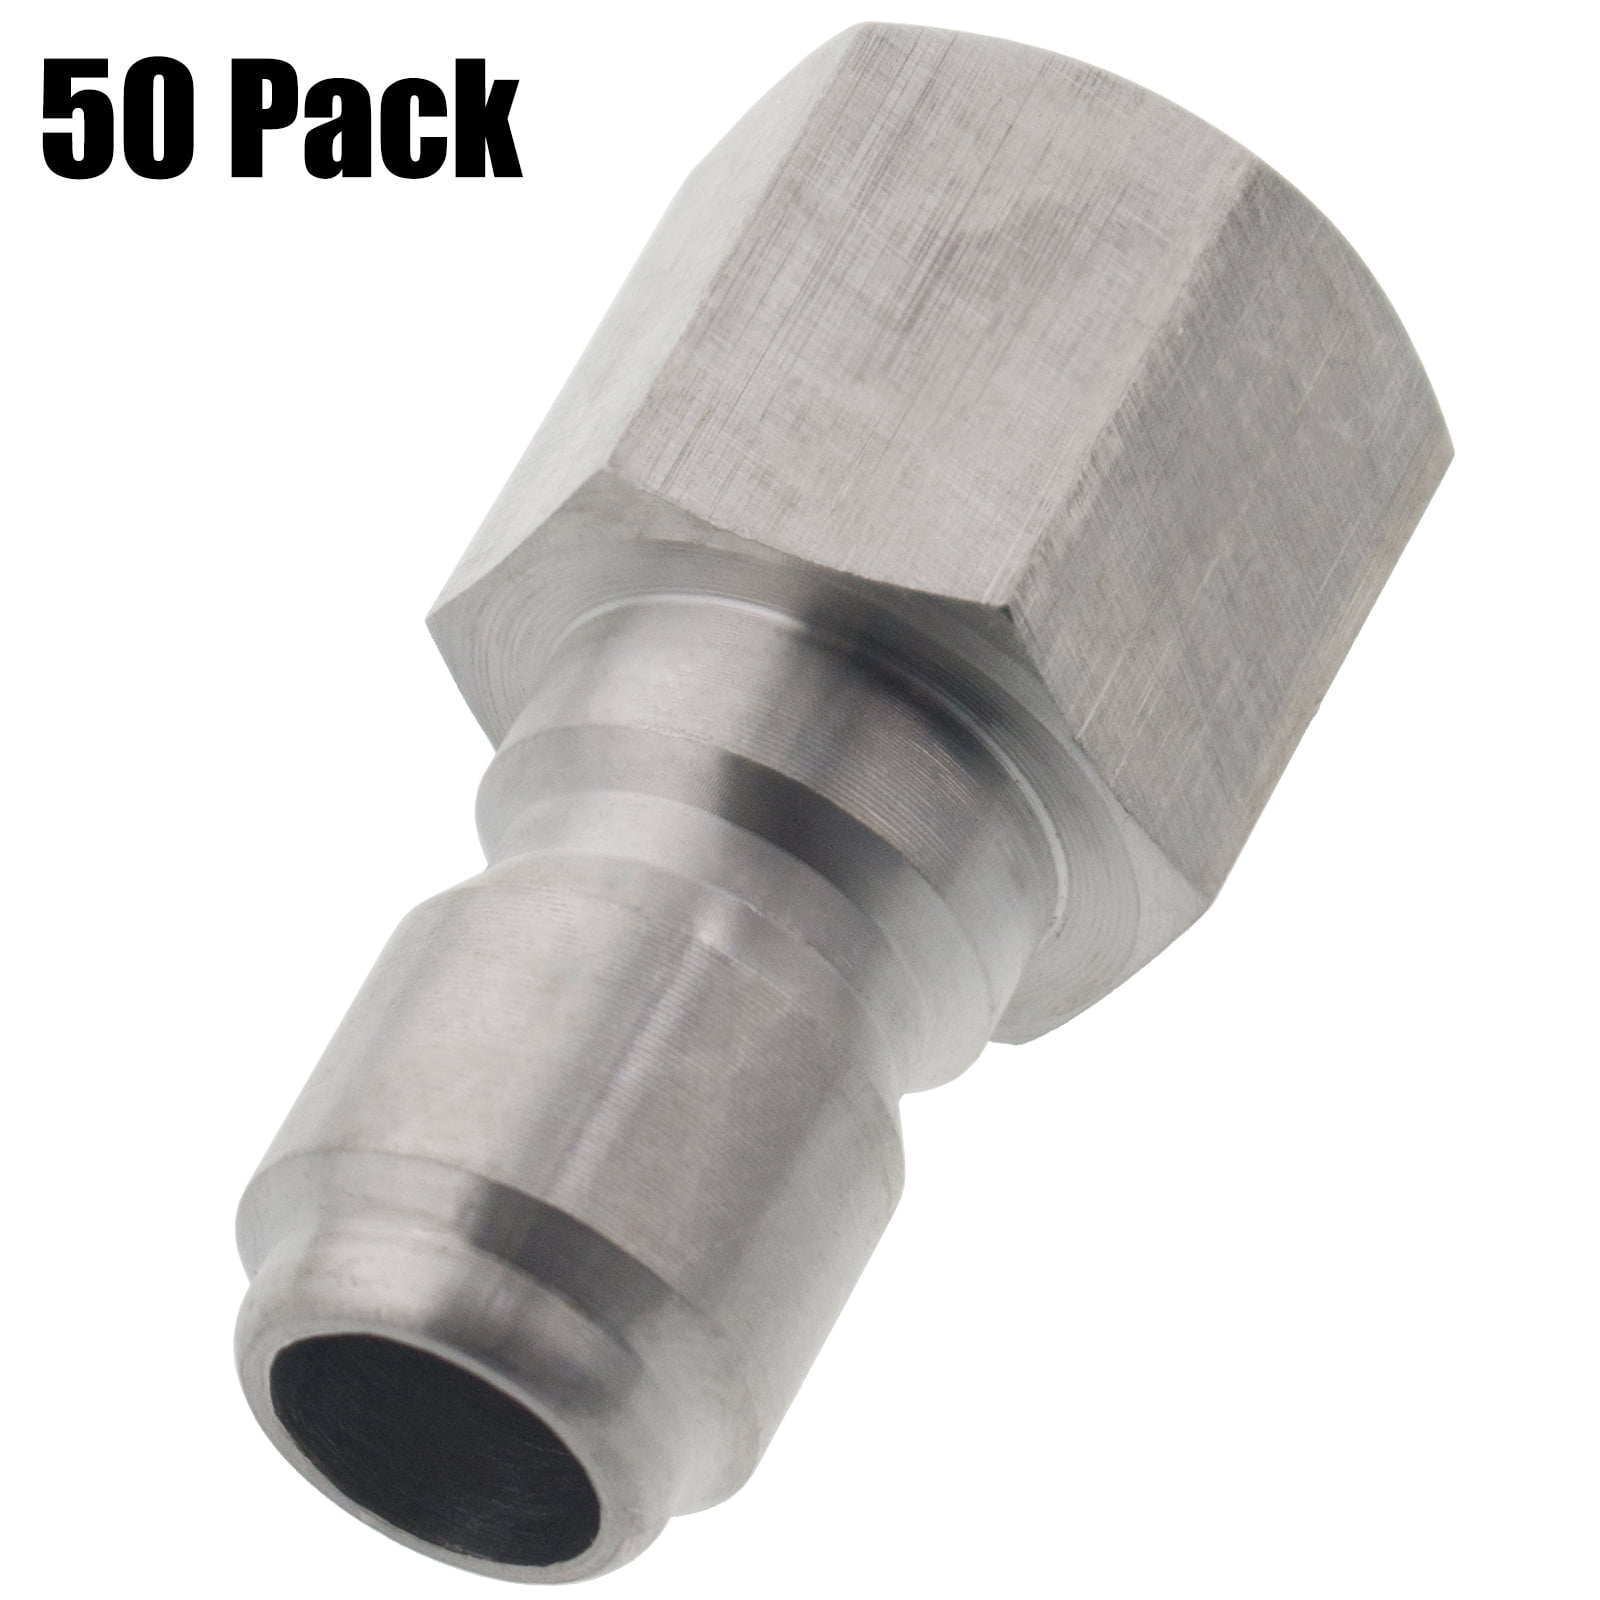 1/4" MPT Male Stainless Steel Plug Quick Connect Coupler Pressure Washer 50